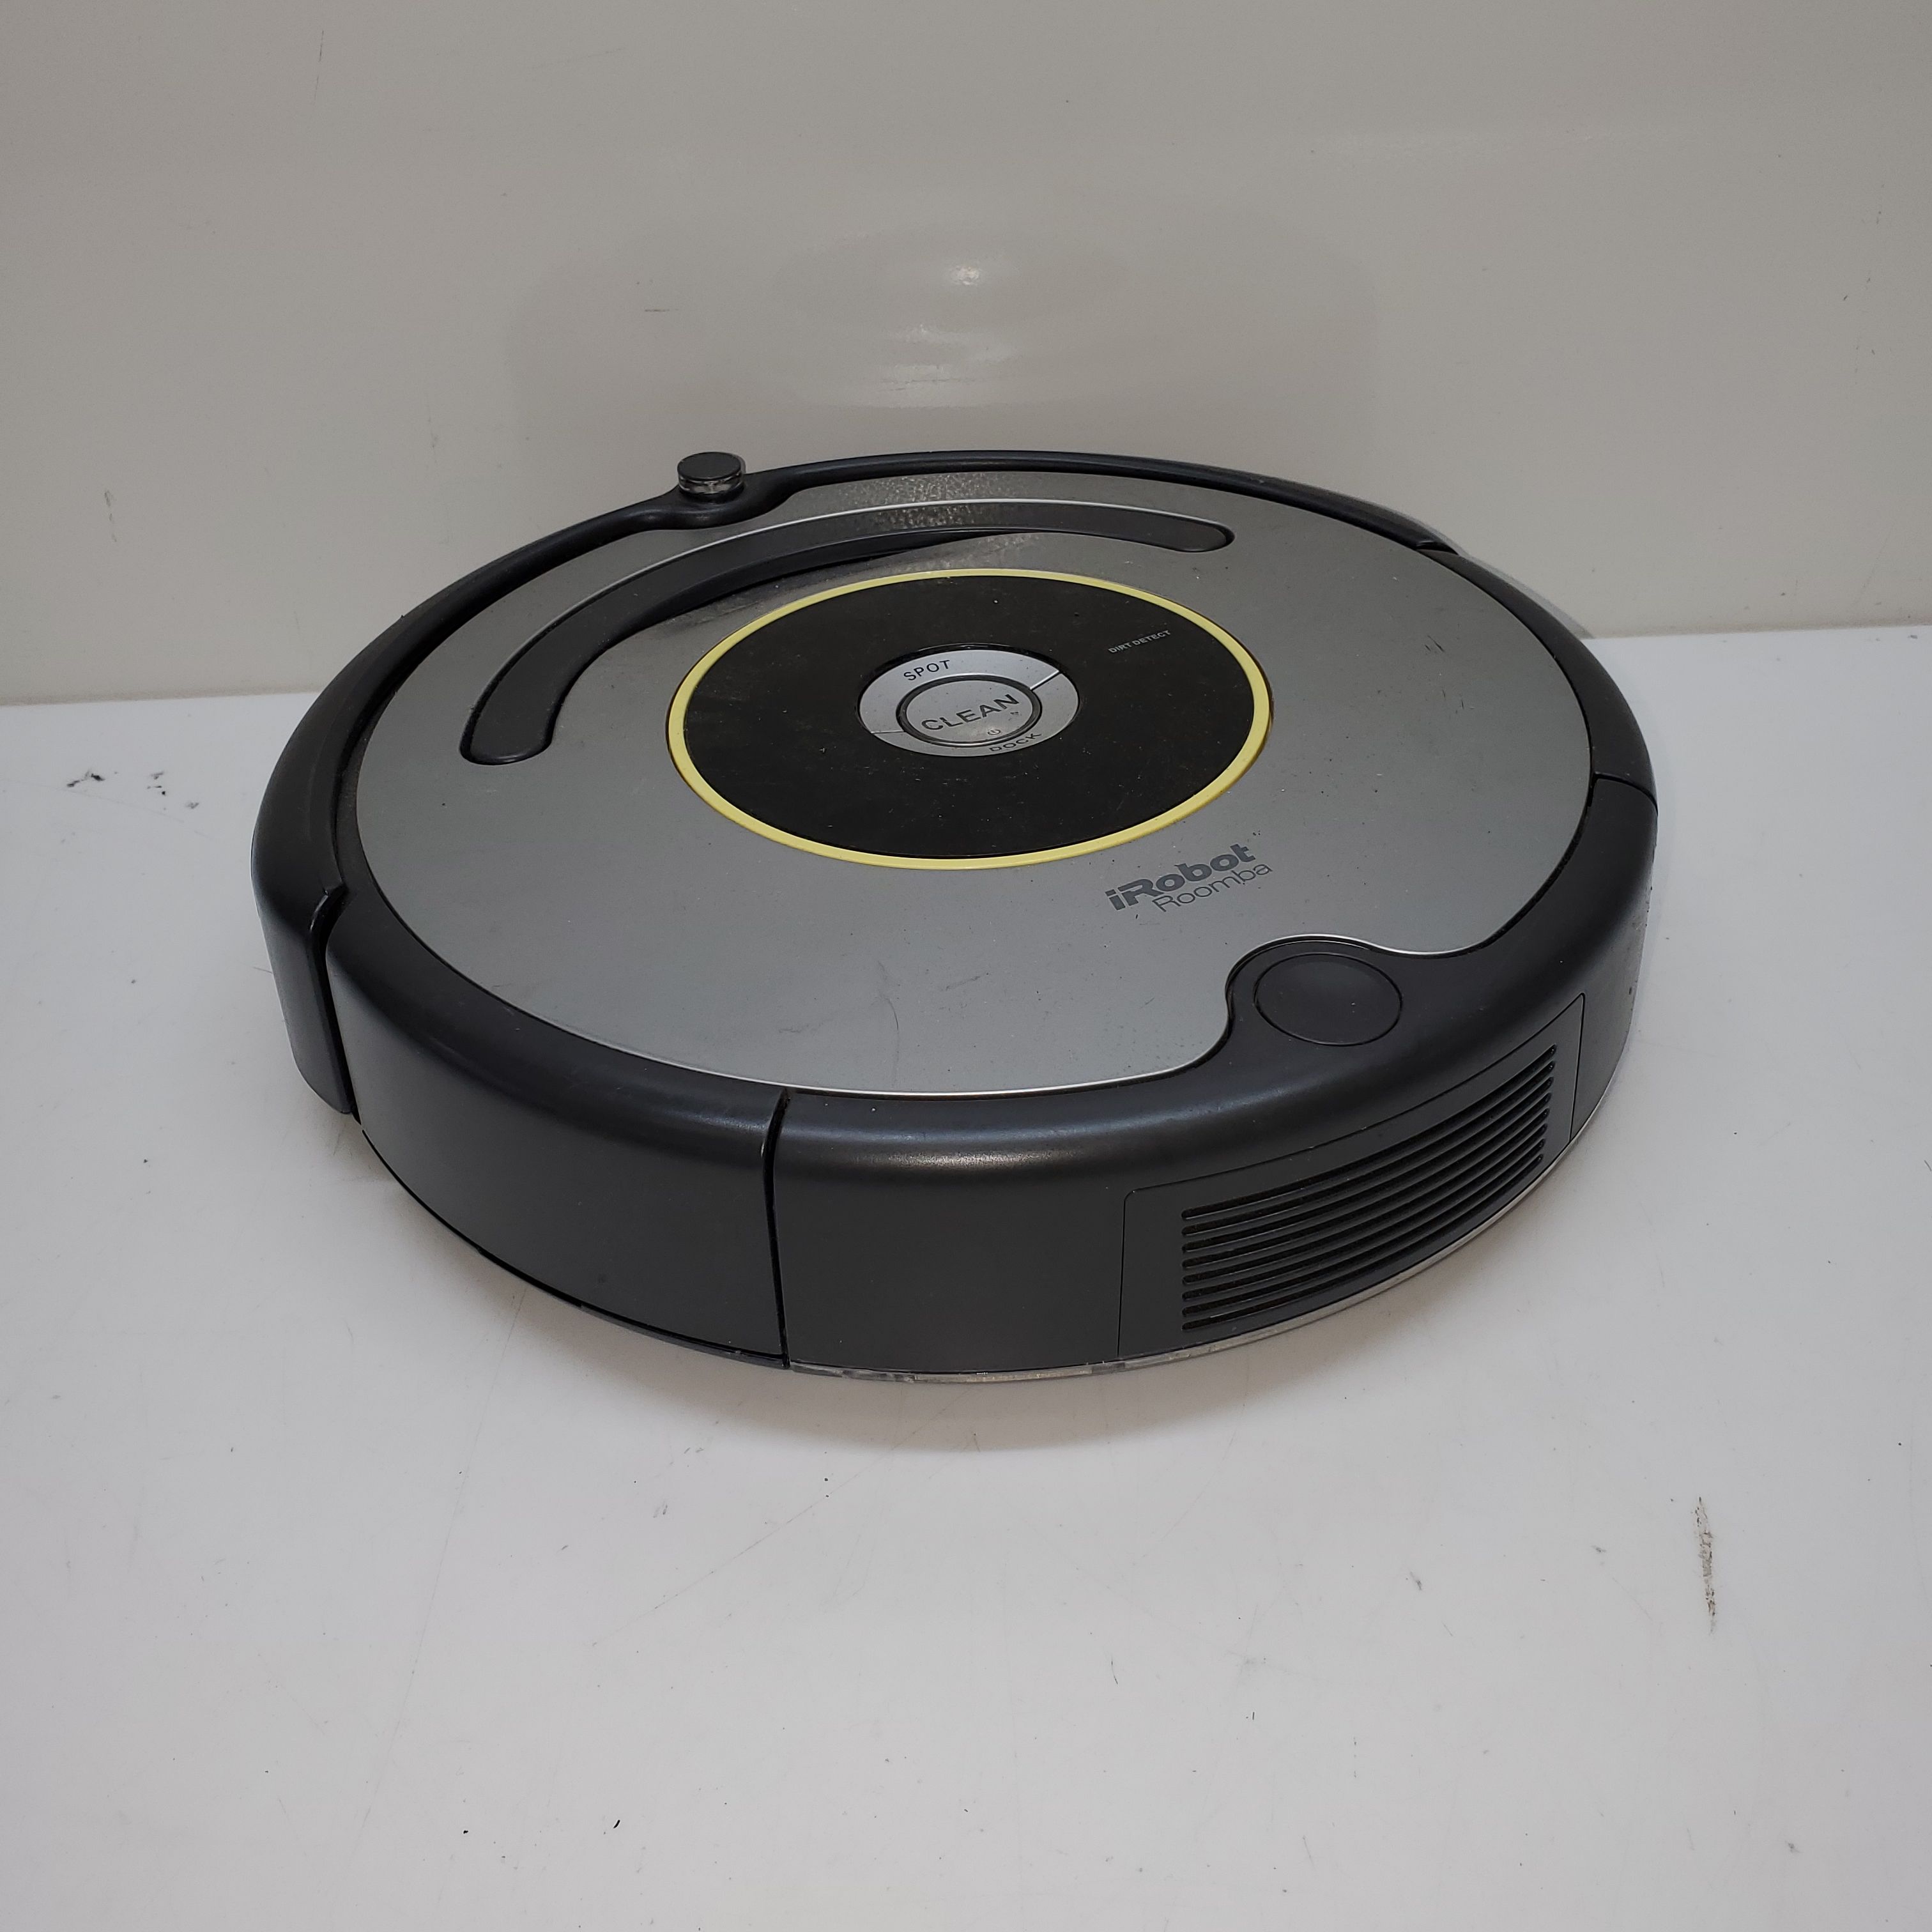 Buy the 2013 iRobot Robot Vacuum Cleaner #630 Untested P/R